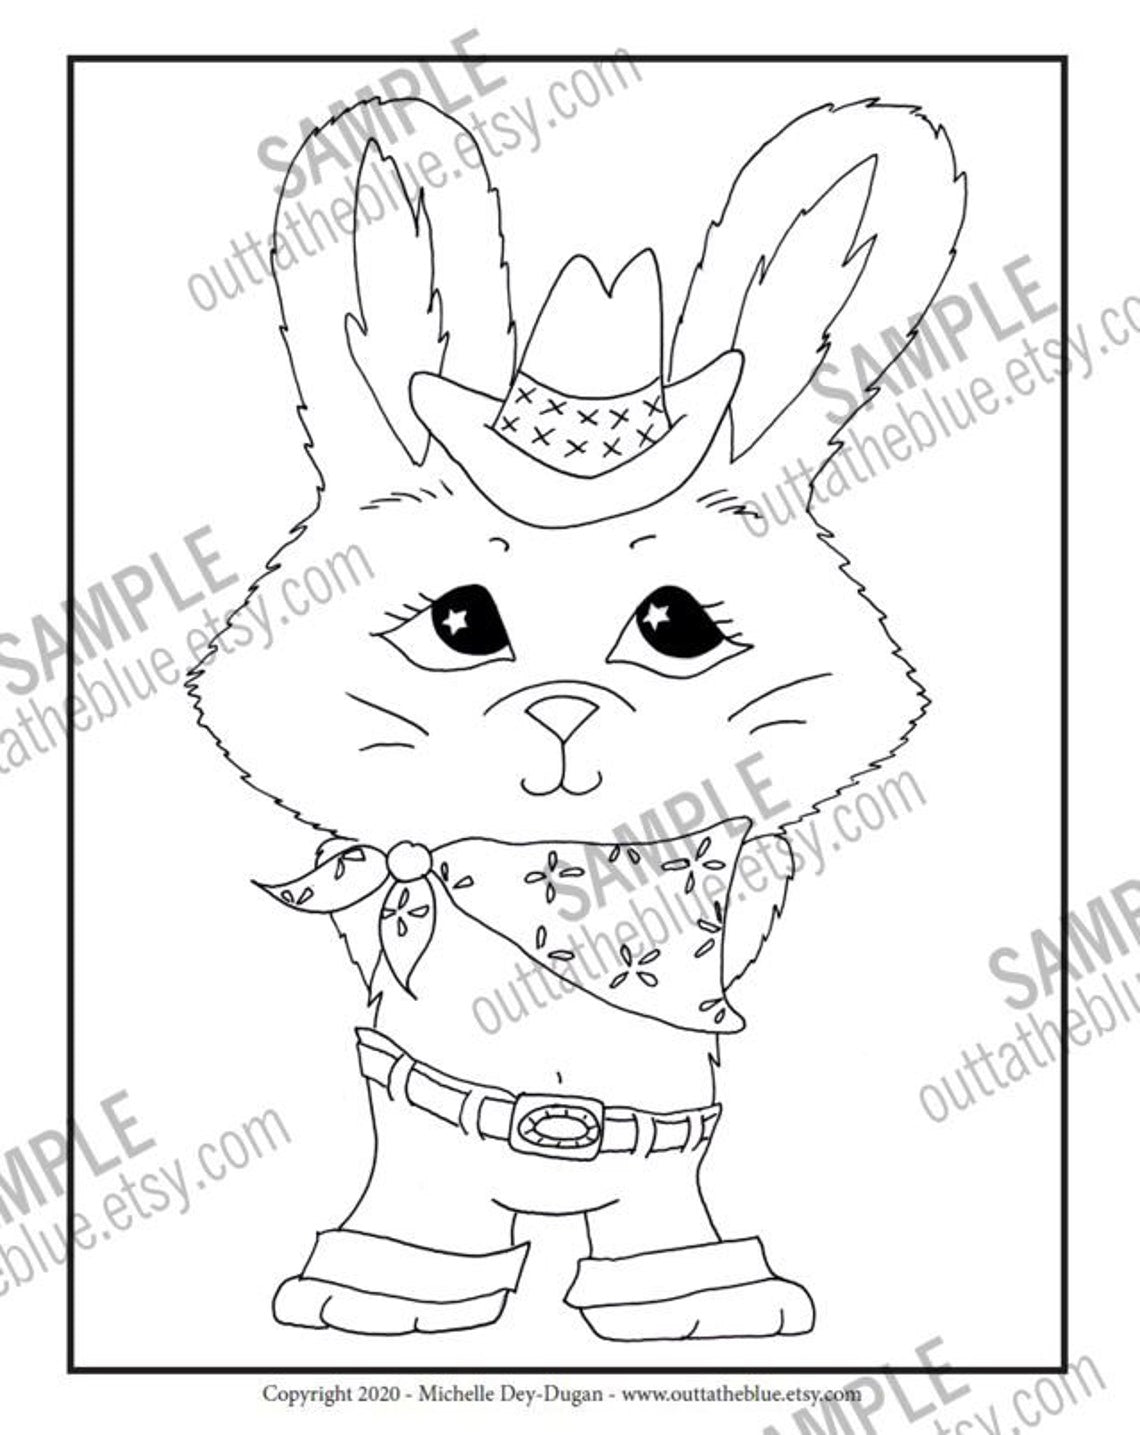 Wee Western Printable Coloring Pages for kids, digital upload PDF files, children's coloring sheets, animal pictures to color, 10 pages